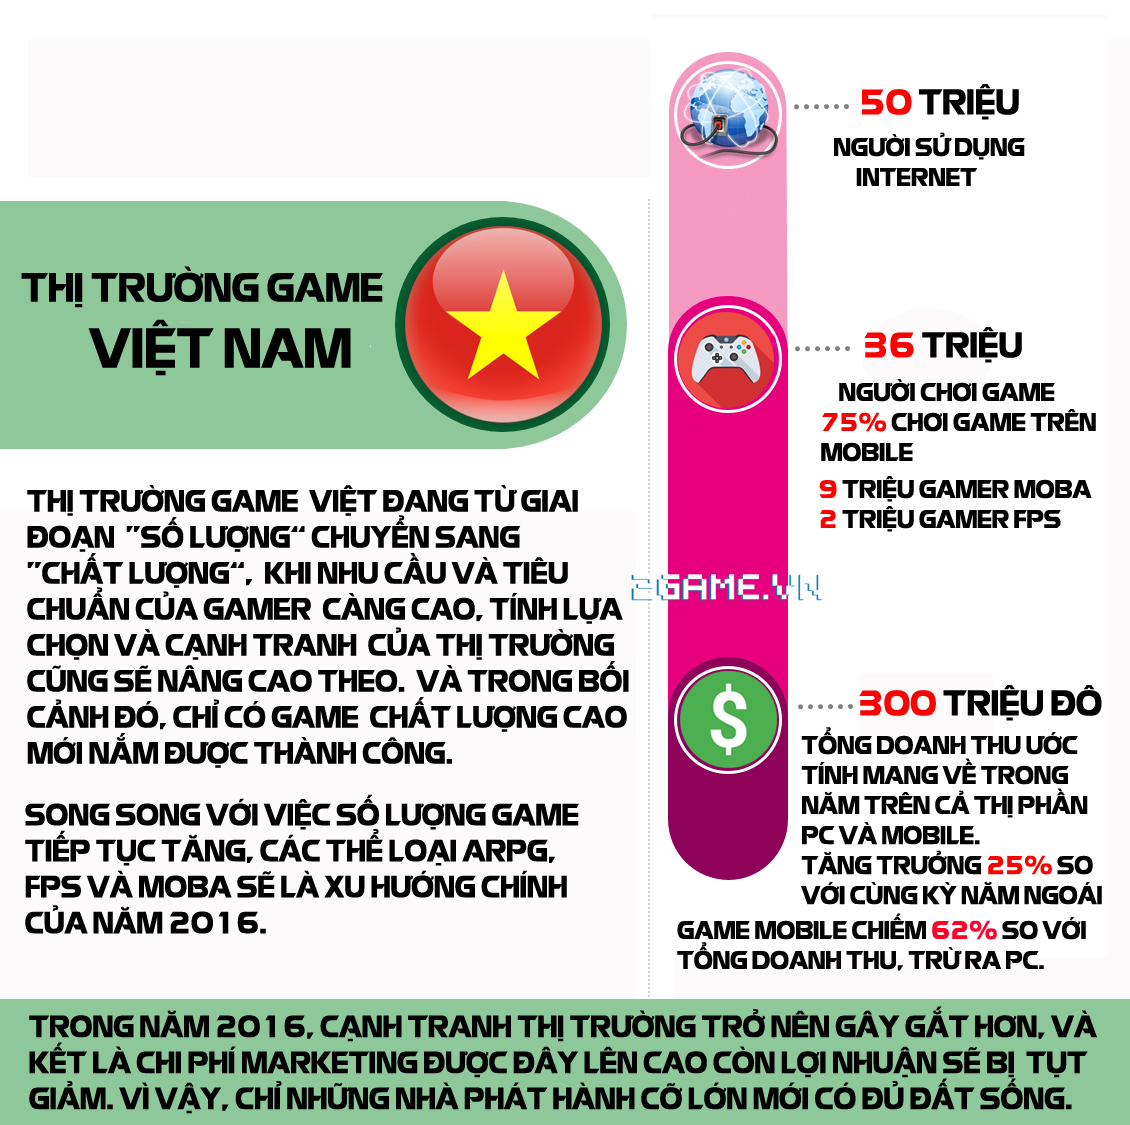 2game-thi-truong-game-online-2016-3.jpg (1130×1125)